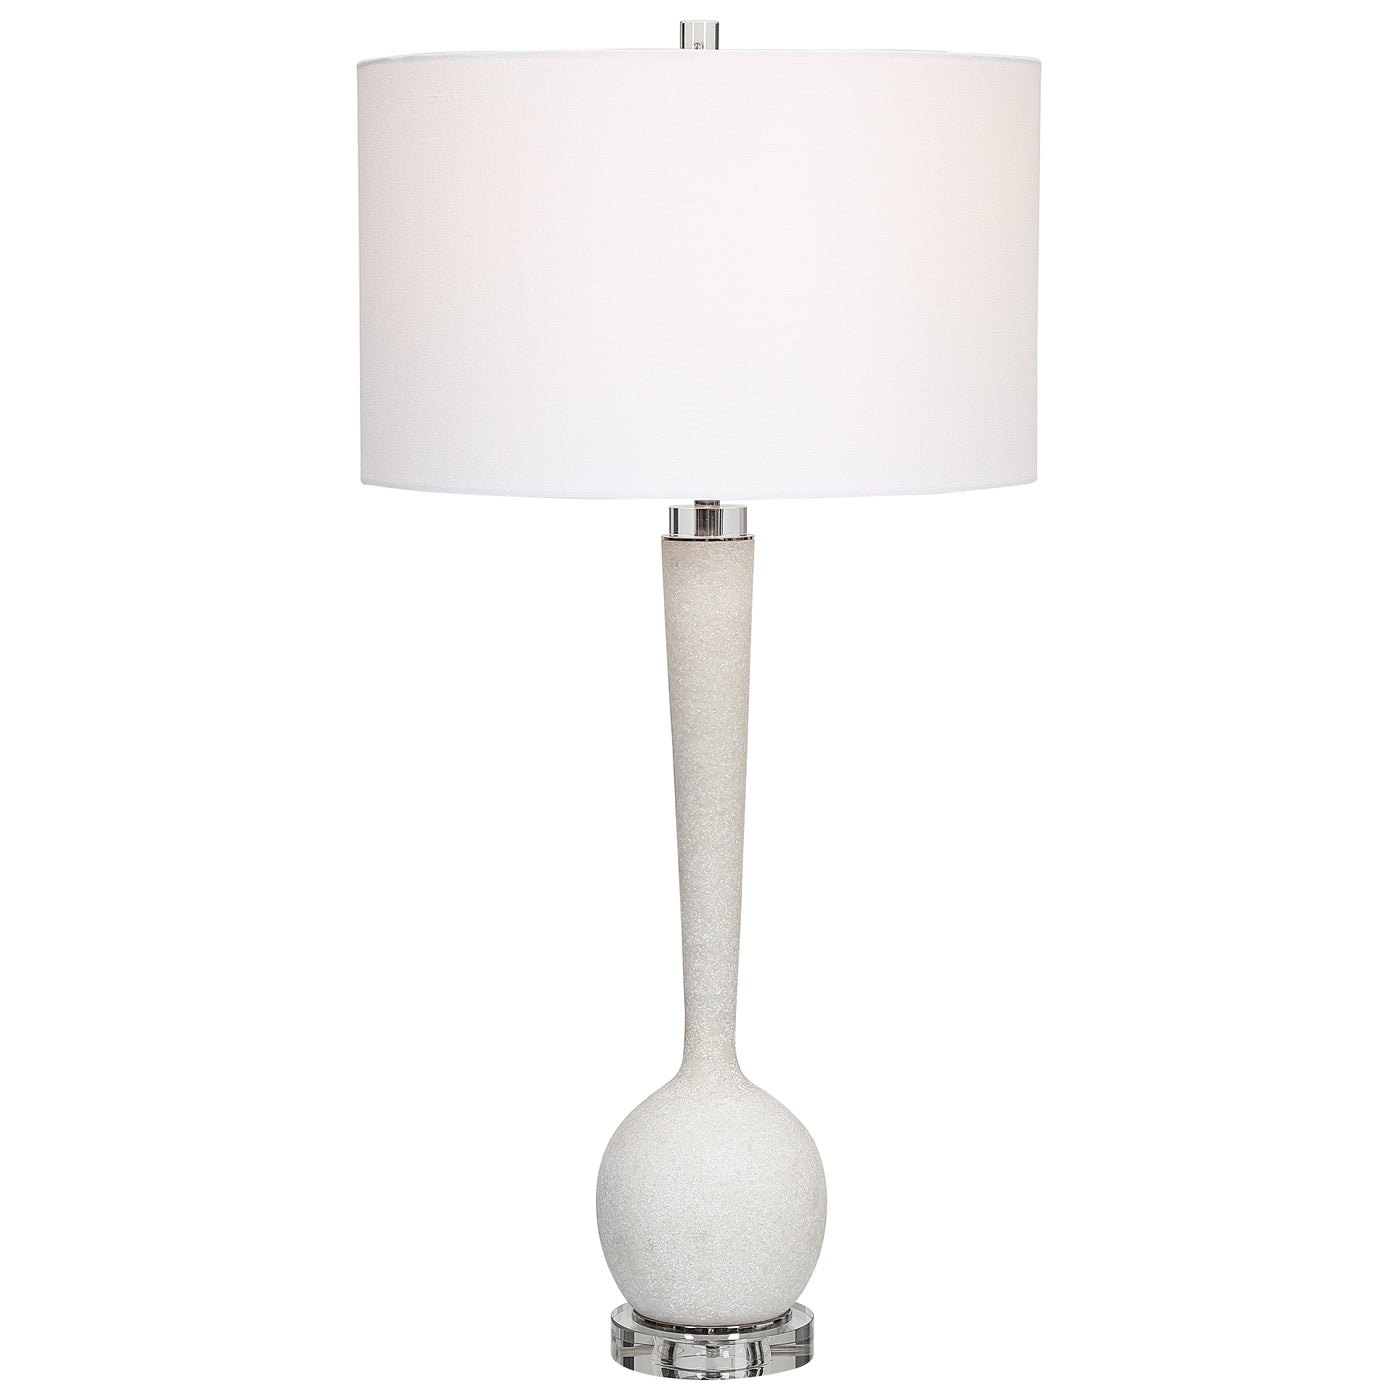 This Elegant Table Lamp Is Executed In A Rich Looking Material Made Of Granulated White Marble That Accurately Replicates ...